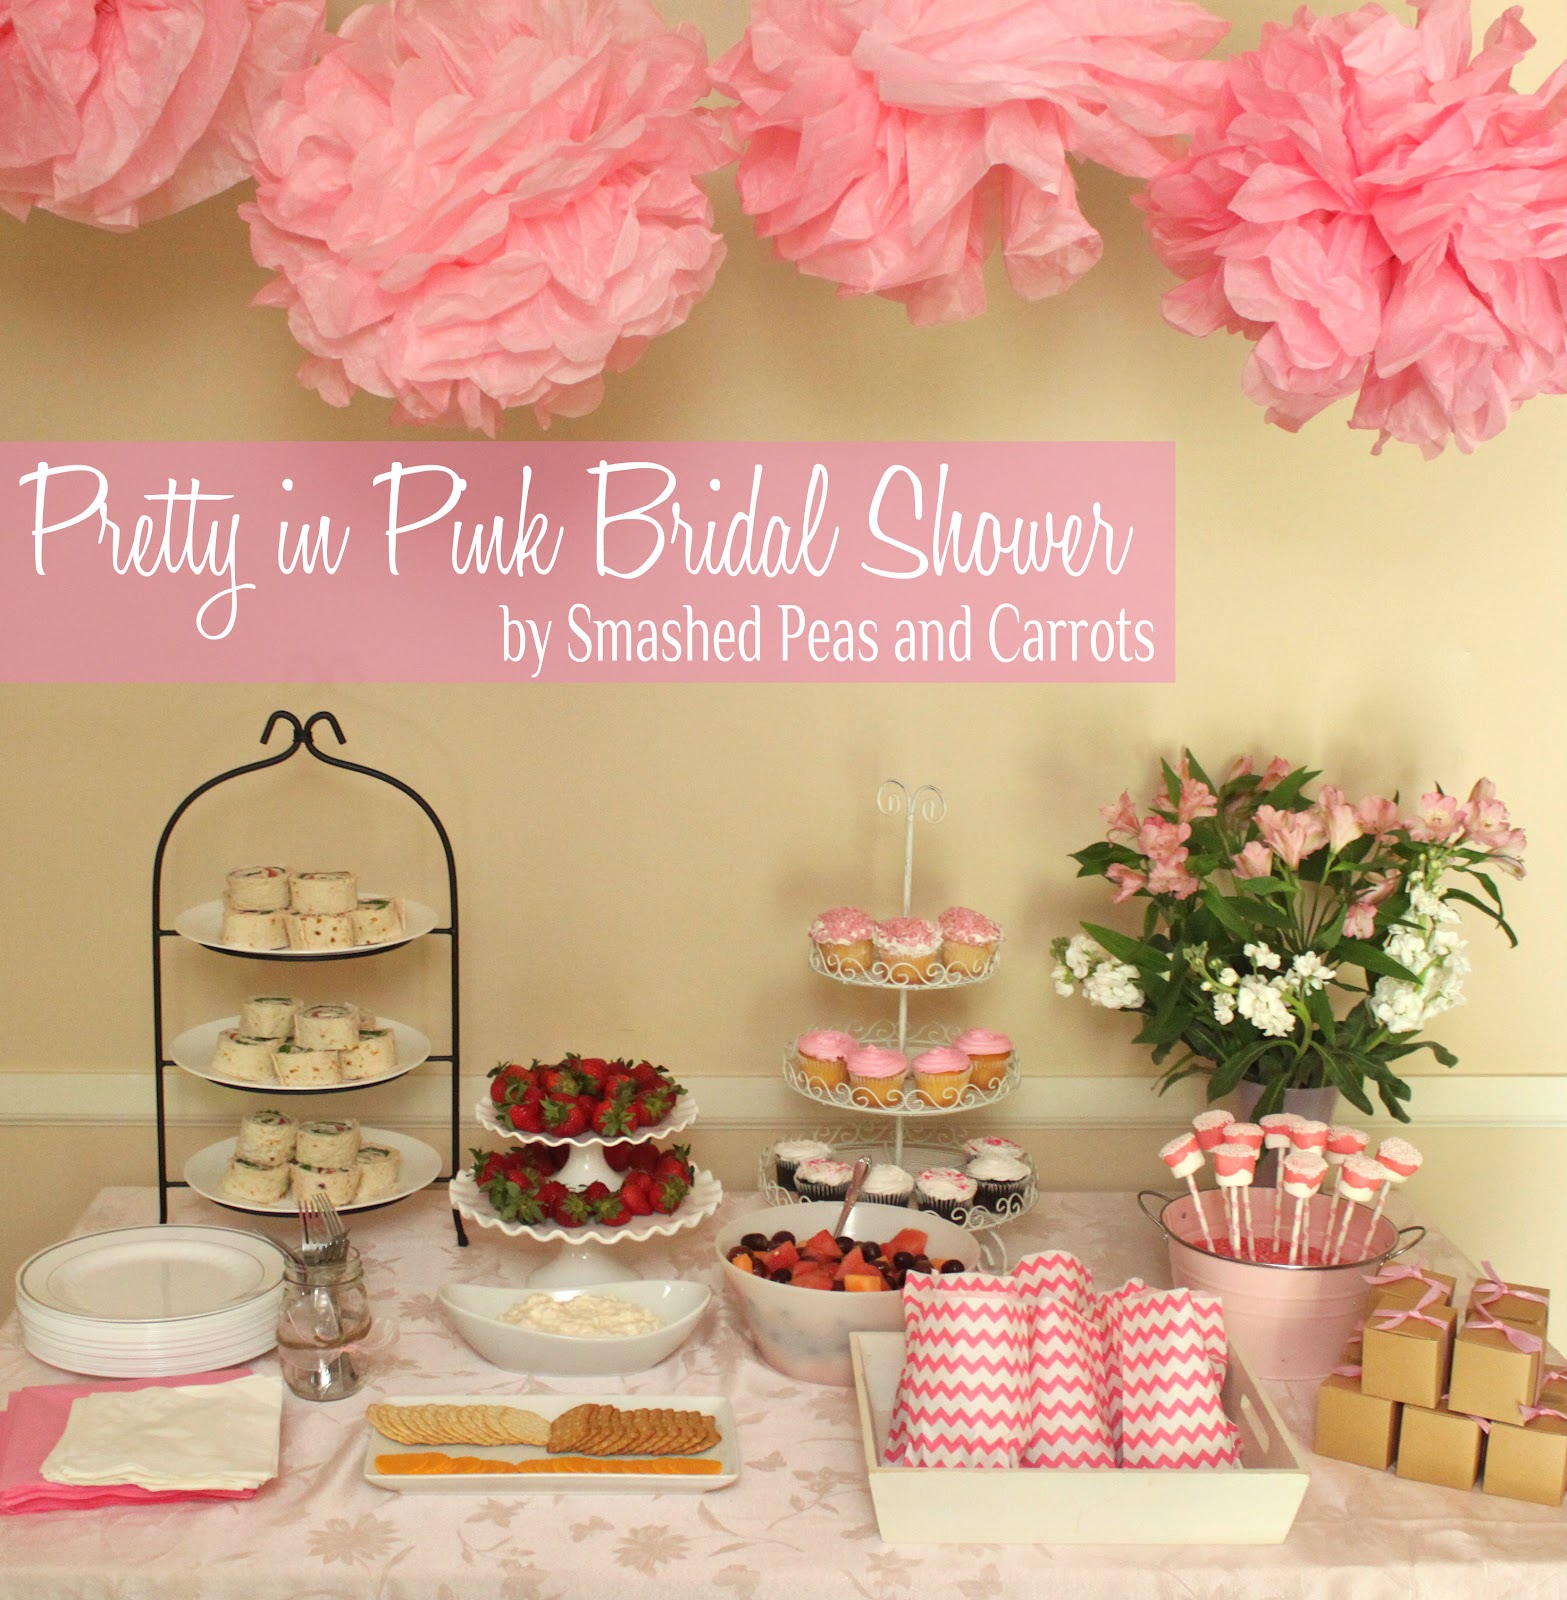 Pretty in Pink Bridal Shower - Smashed Peas & Carrots